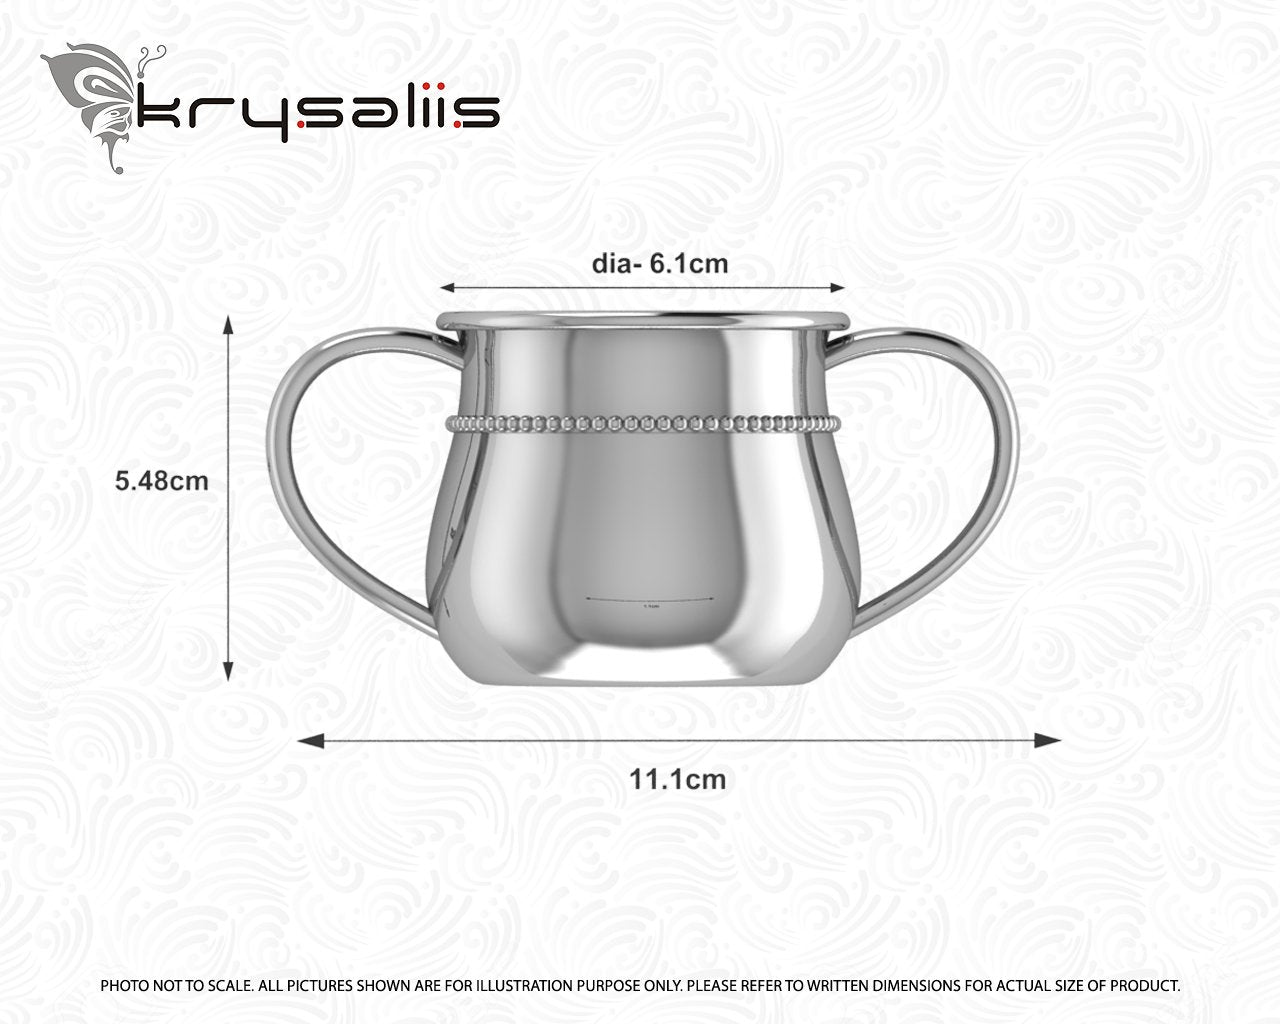 Beaded 2 Handle Silver Plated Baby Cup by Krysaliis